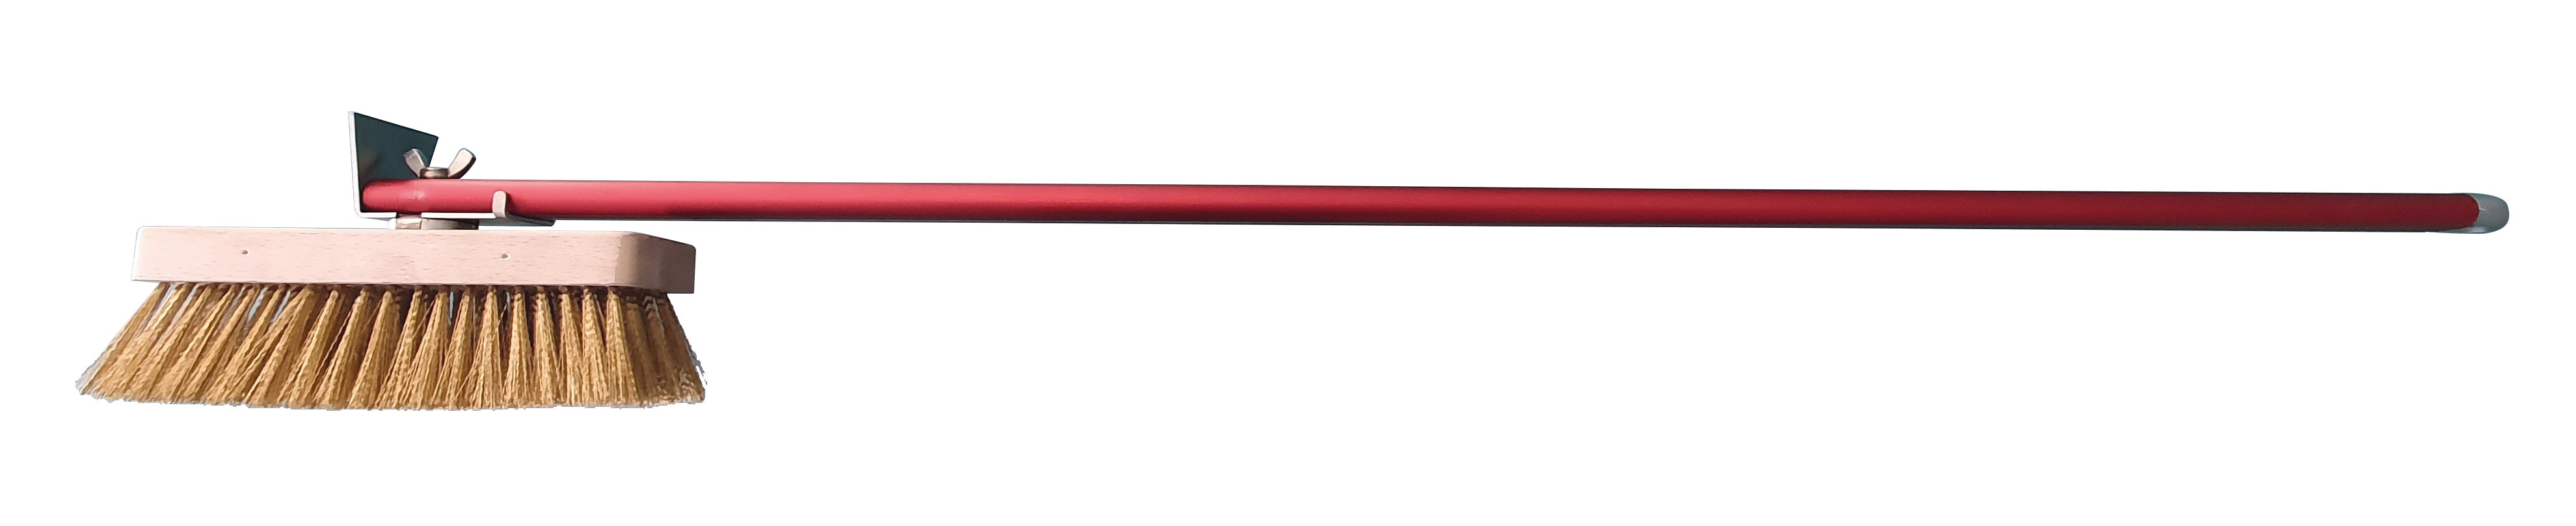 AL-RA2467/18  - Brass Pizza oven brush, (W)7" , 59" anodized red aluminum, Made in Italy